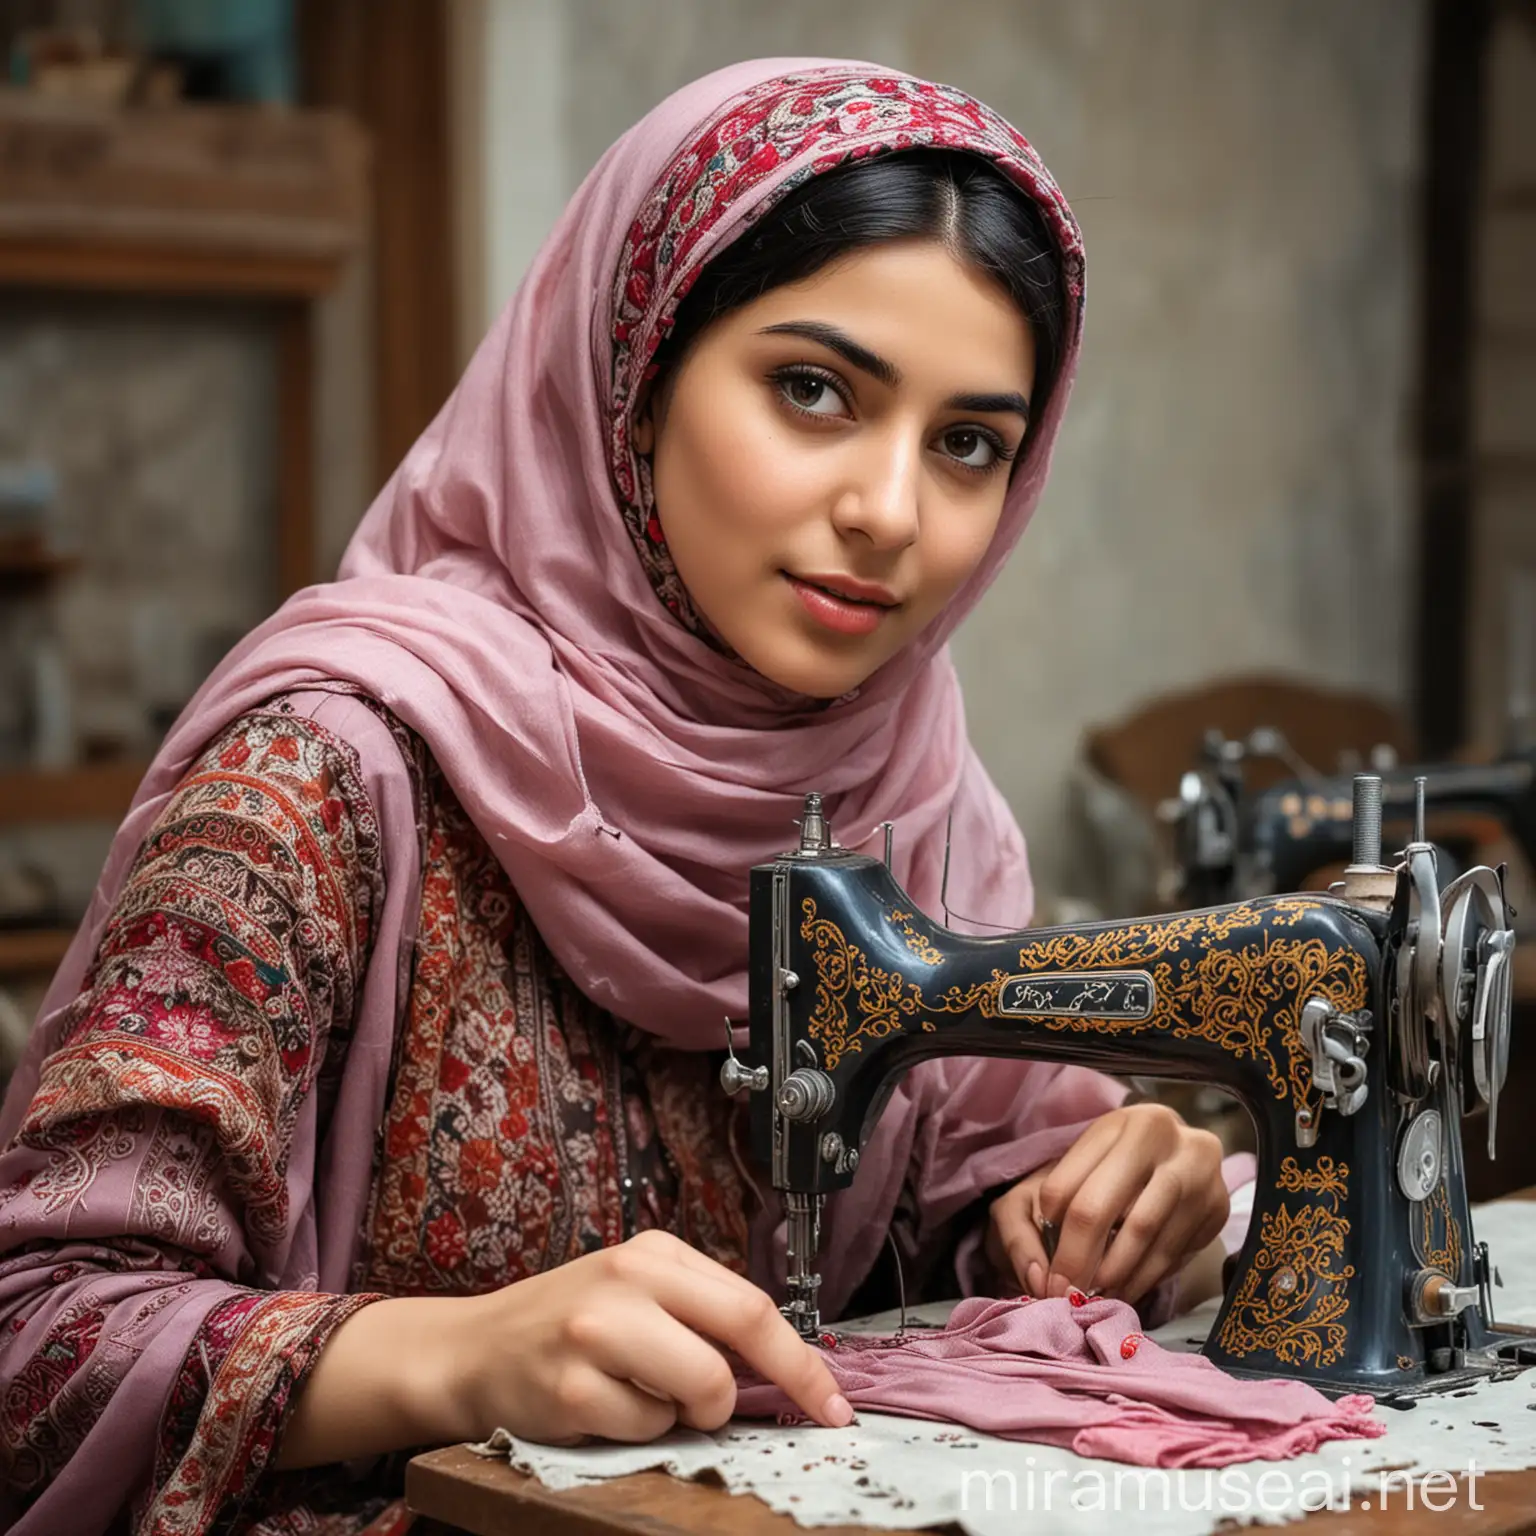 Young Iranian Woman in Traditional Hijab Seamstress Scene with Broken Sewing Machine